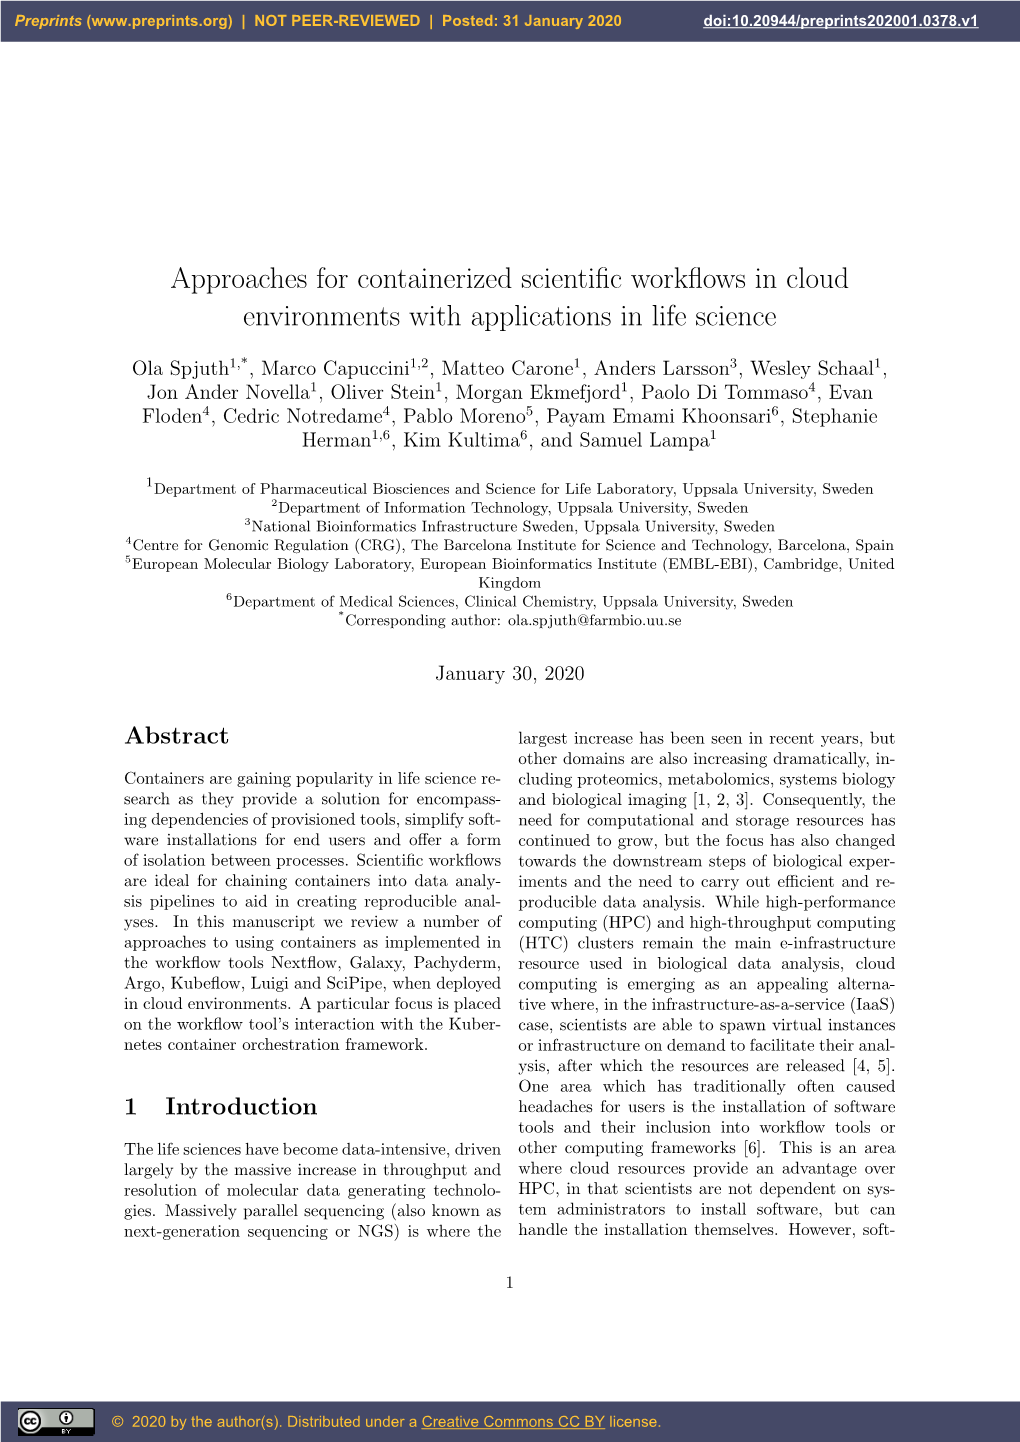 Approaches for Containerized Scientific Workflows in Cloud